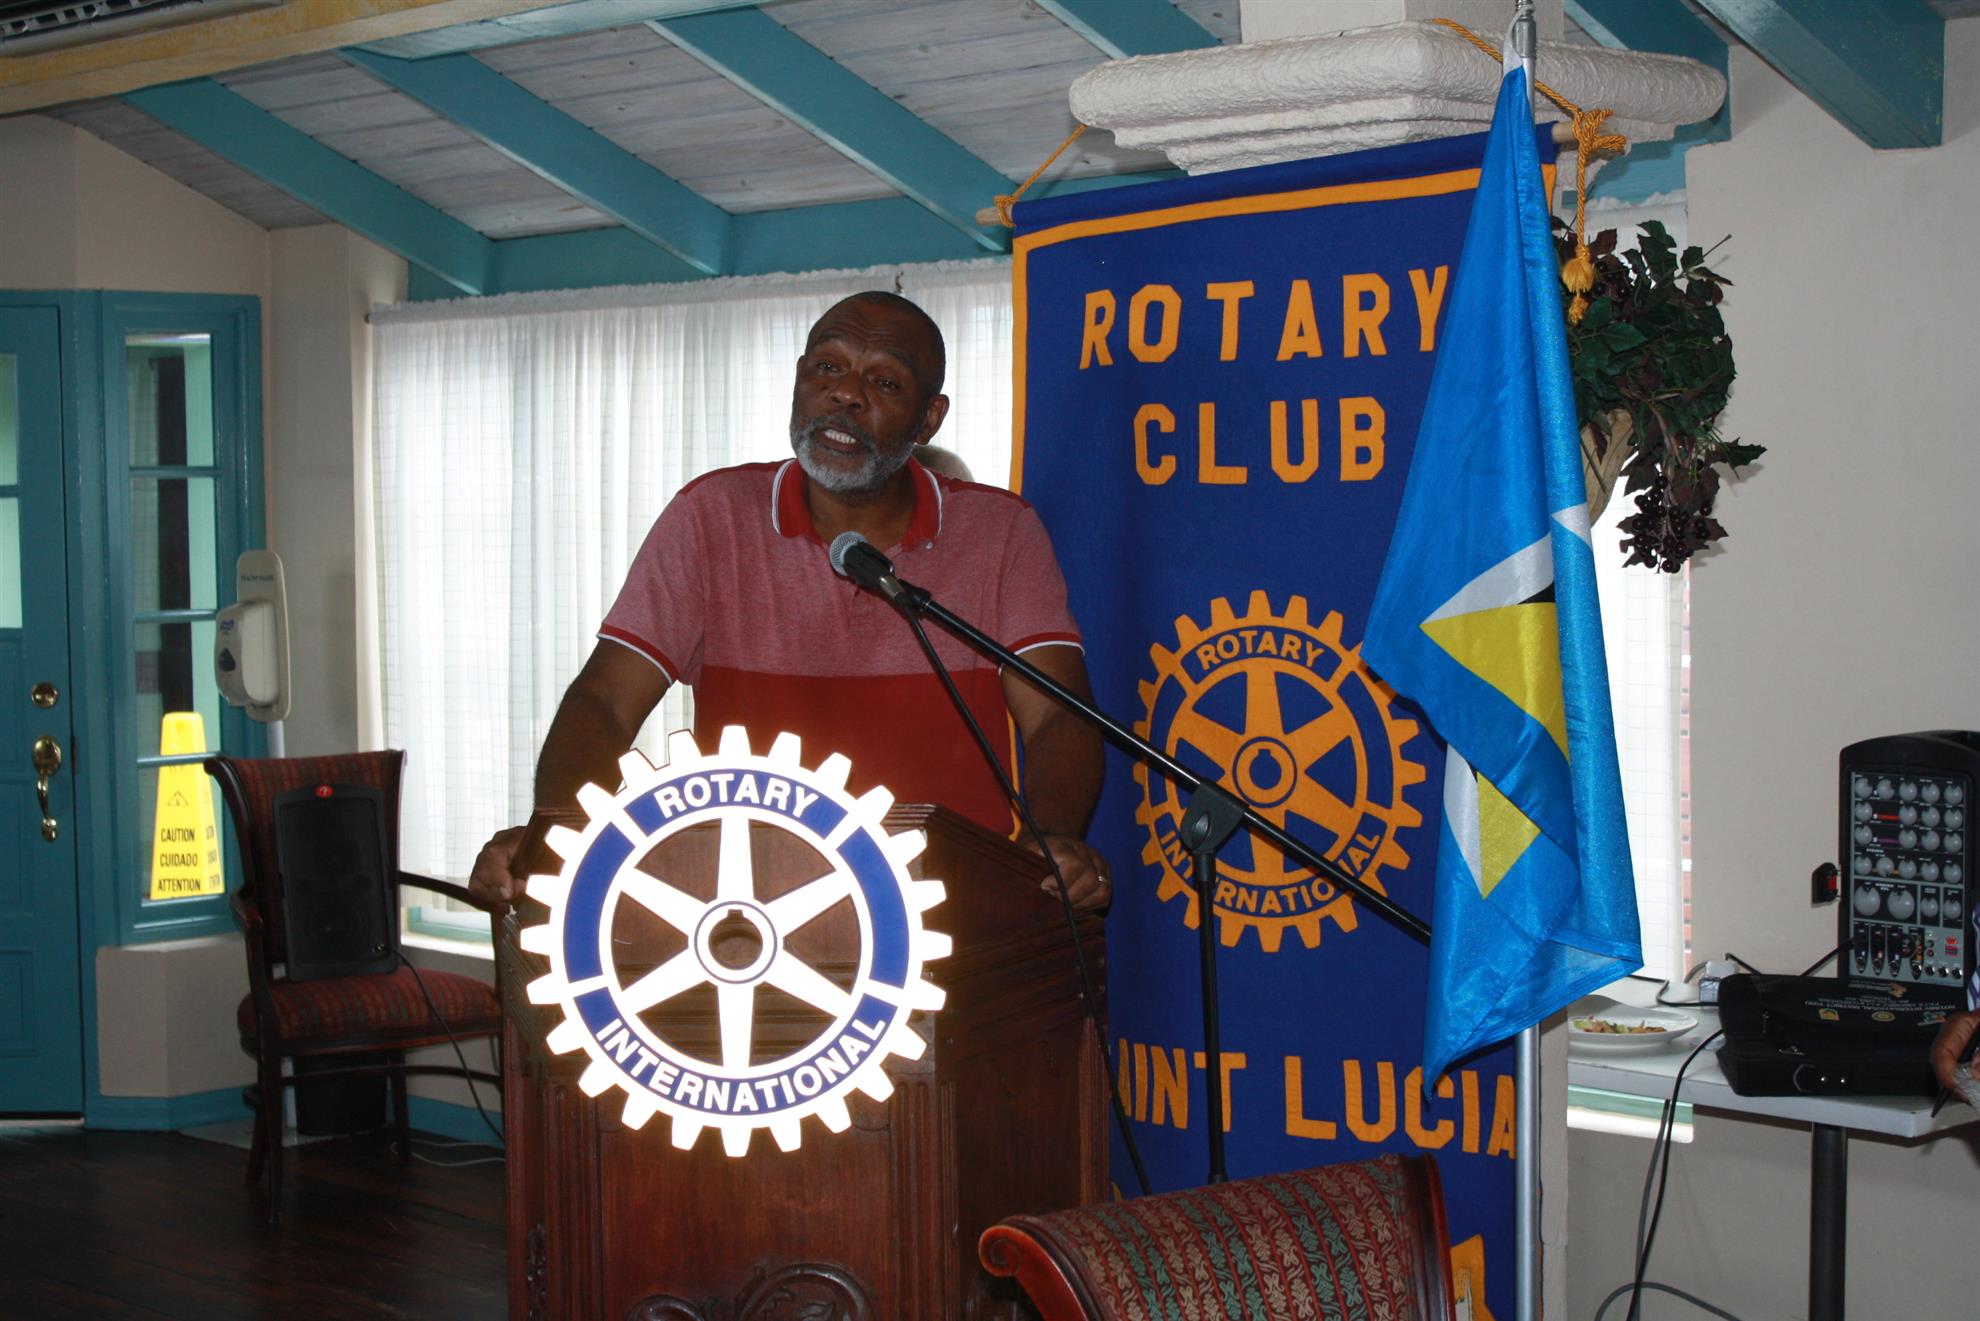 The Rotary Club Of St Lucia December 1 2017 Bulletin Dec 01 2017